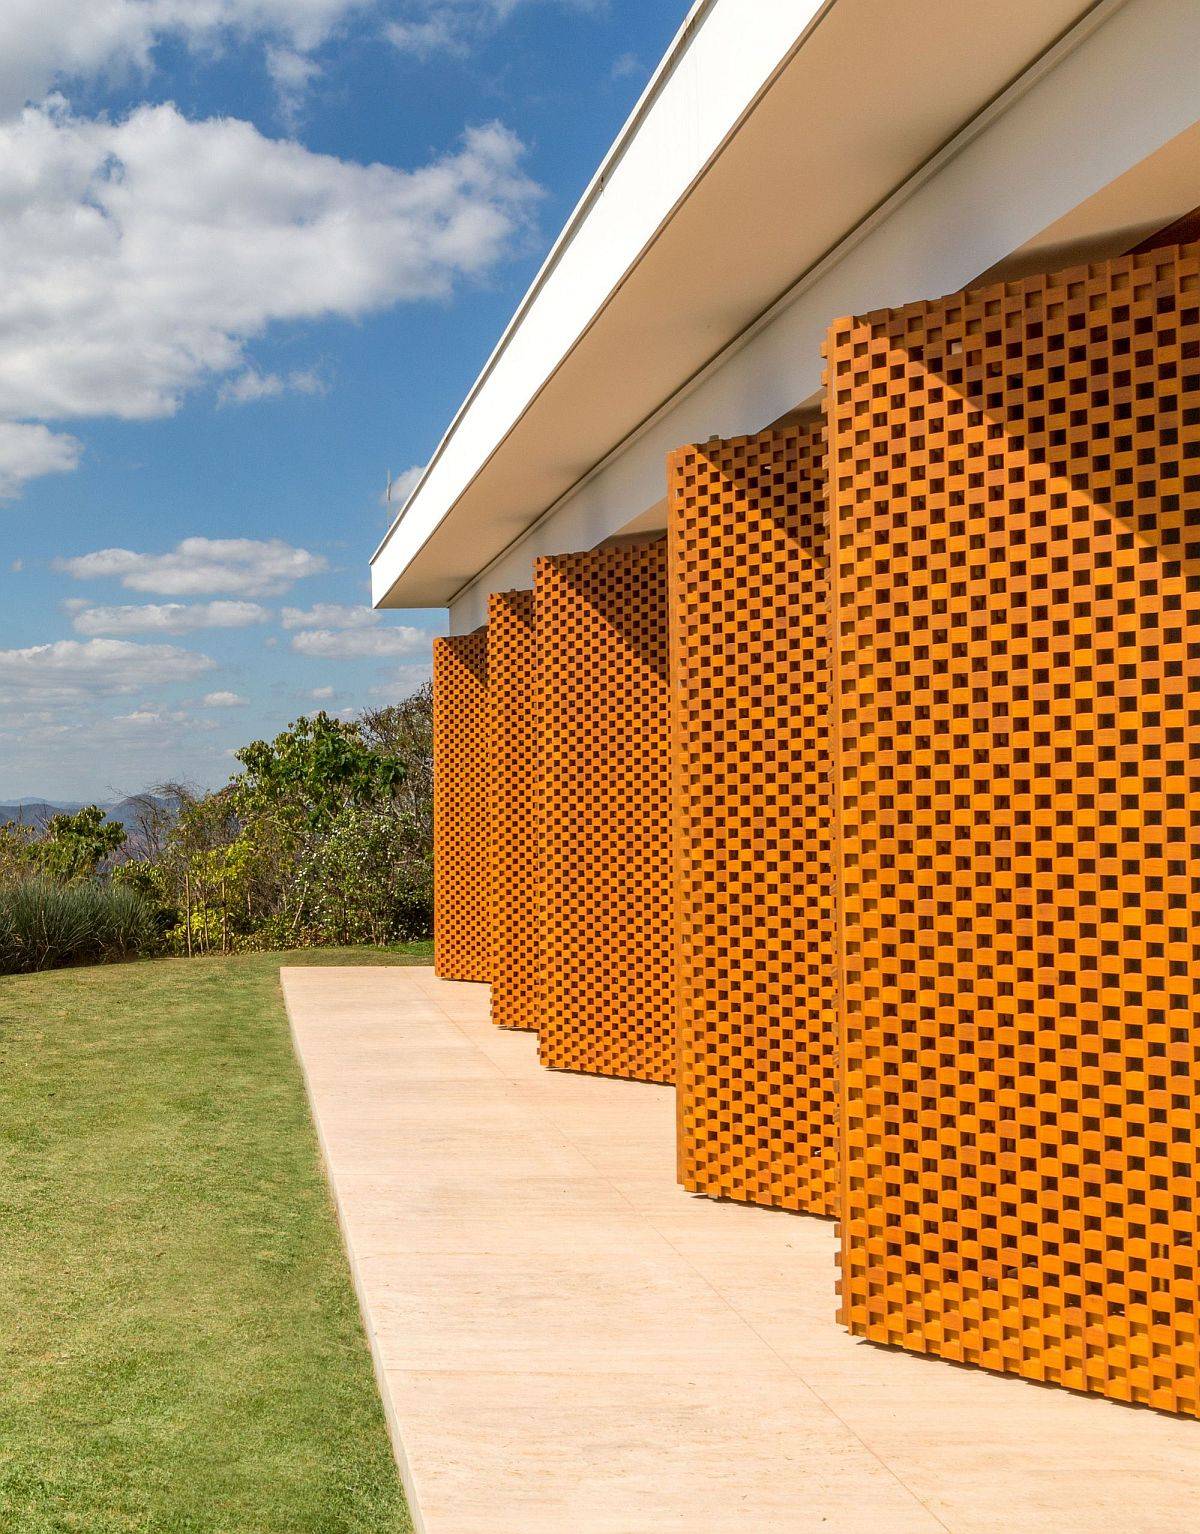 Custom pivoting wooden panels with perforated design give the home a unique identity